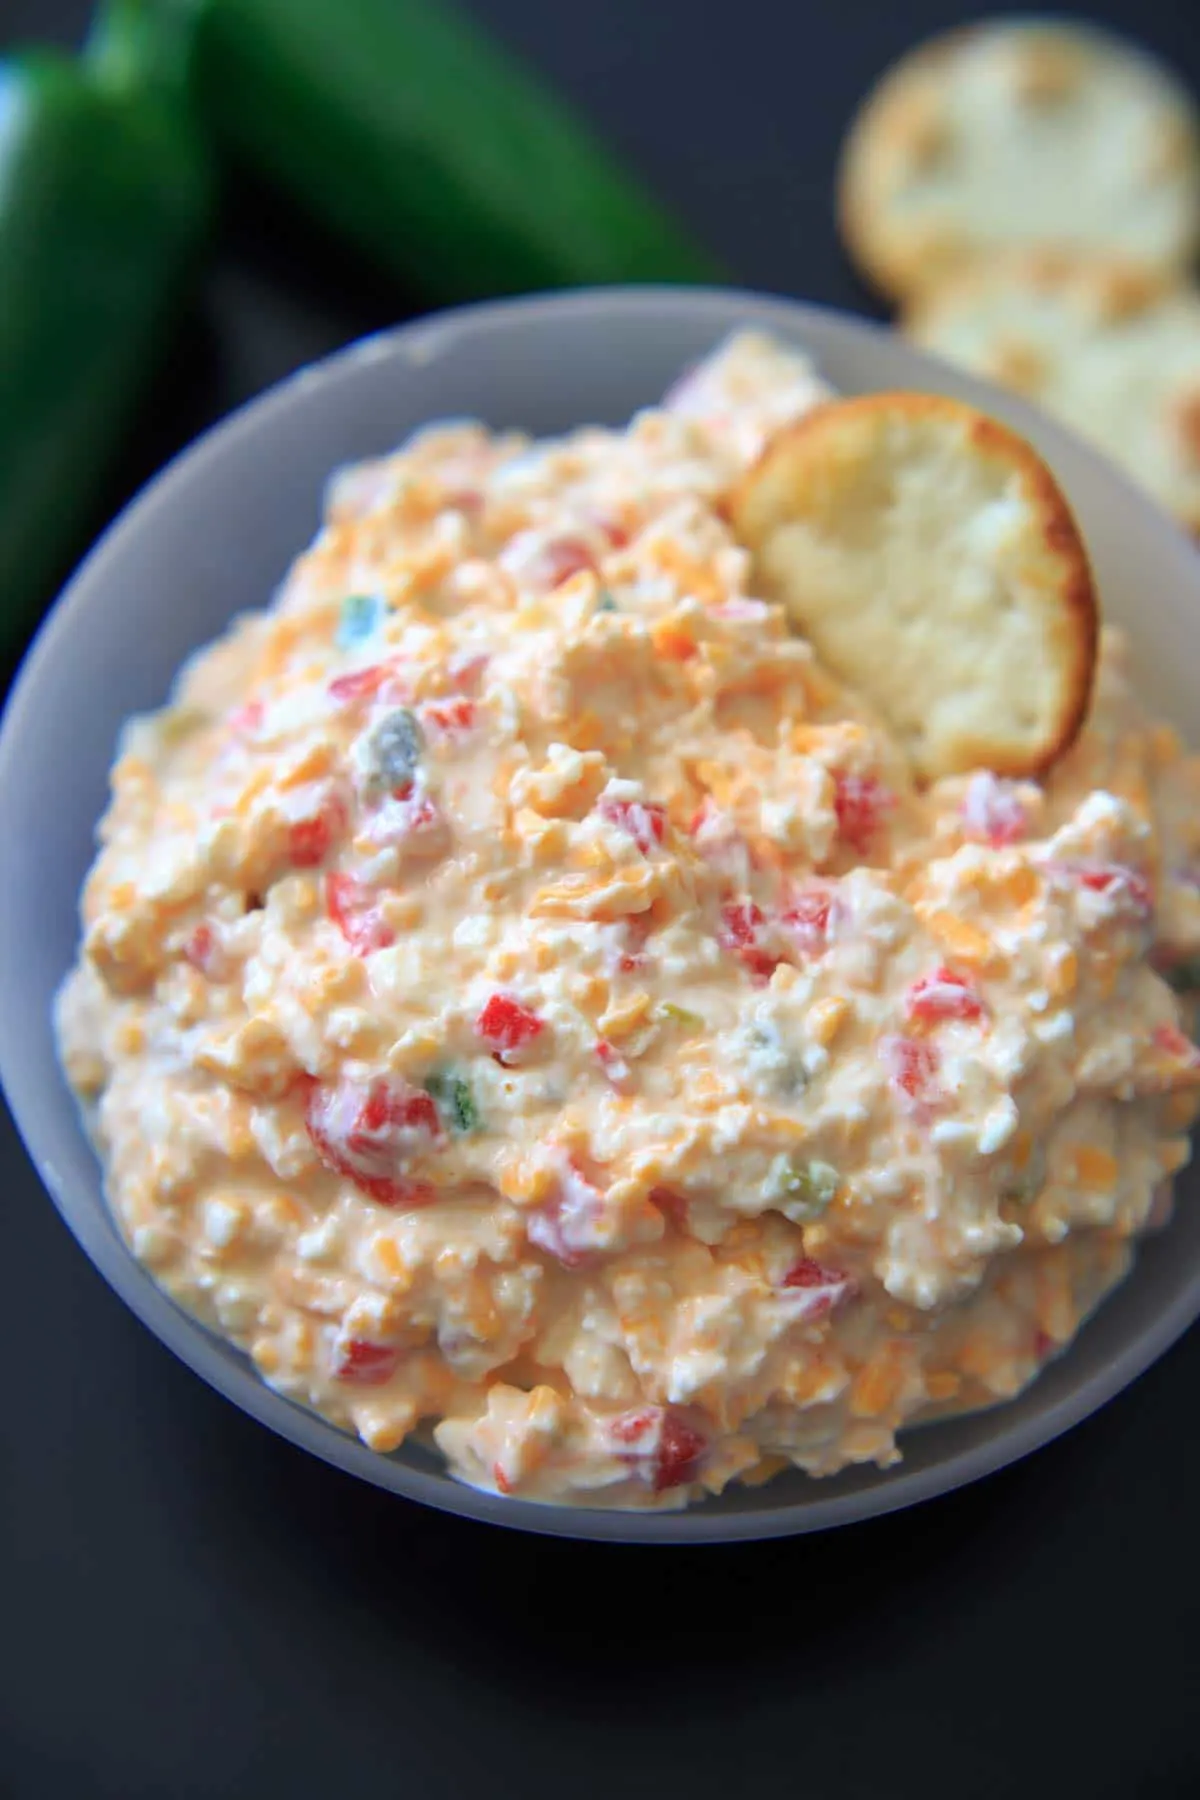 a cracker dipped into a bowl of jalapeno pimento cheese